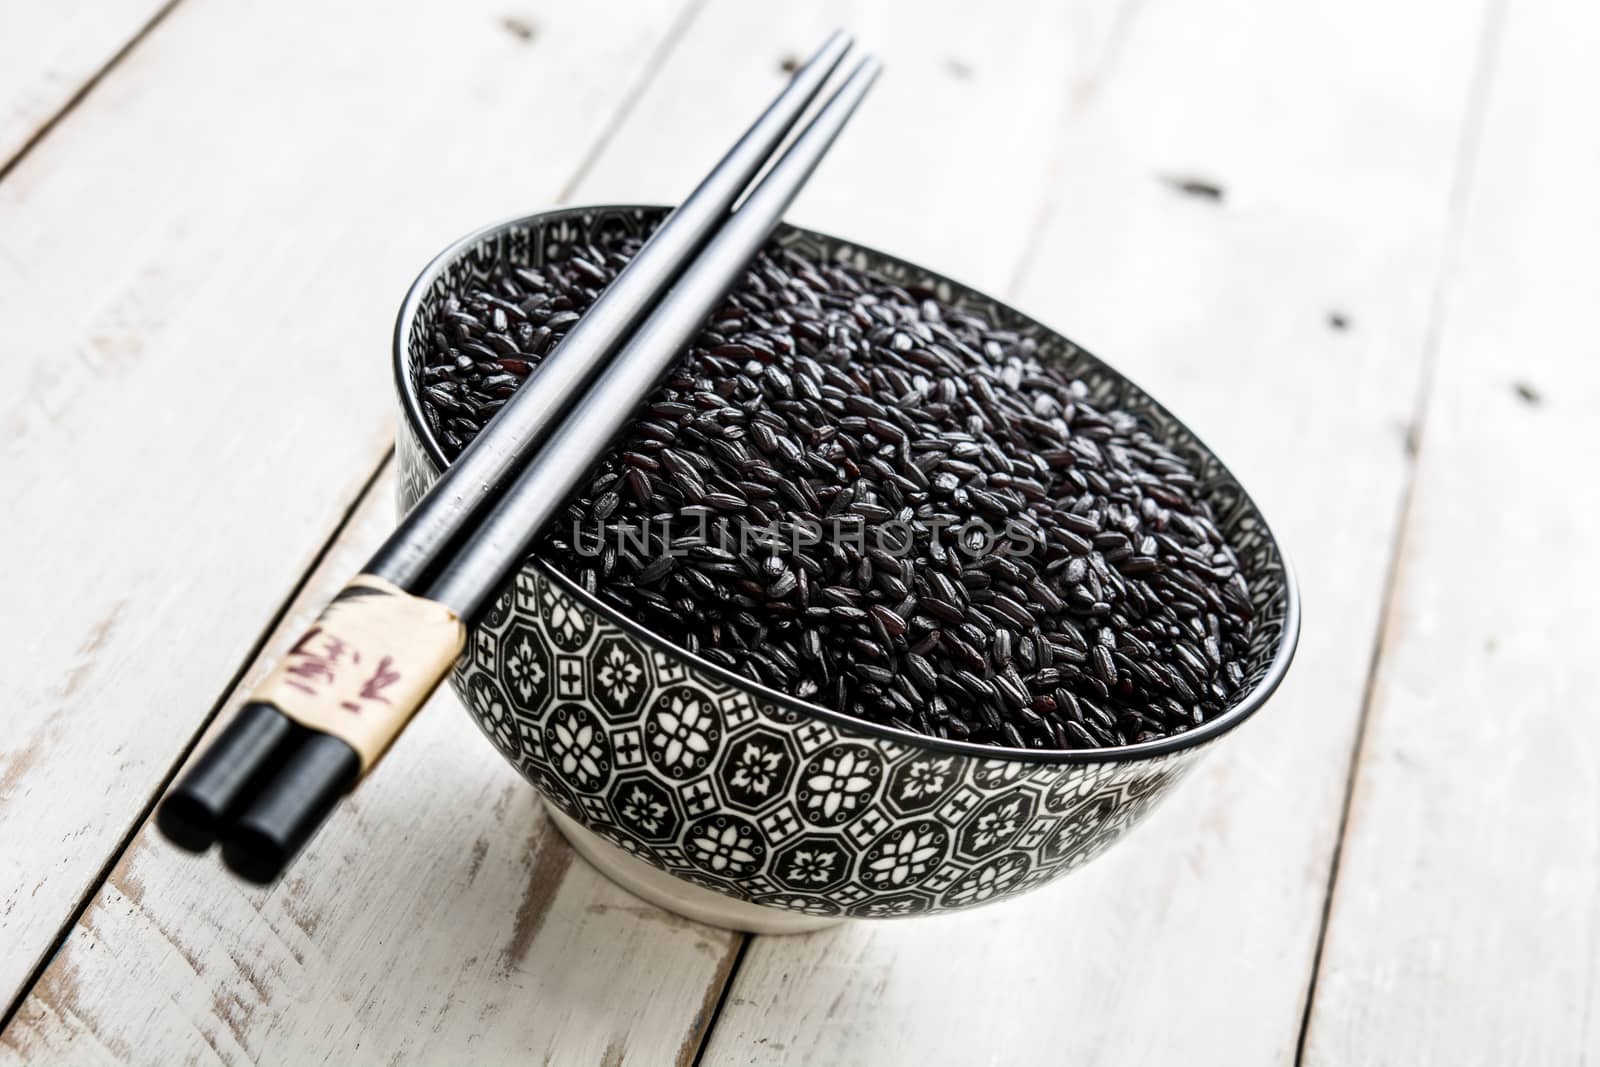 Raw black rice on white wooden background by chandlervid85